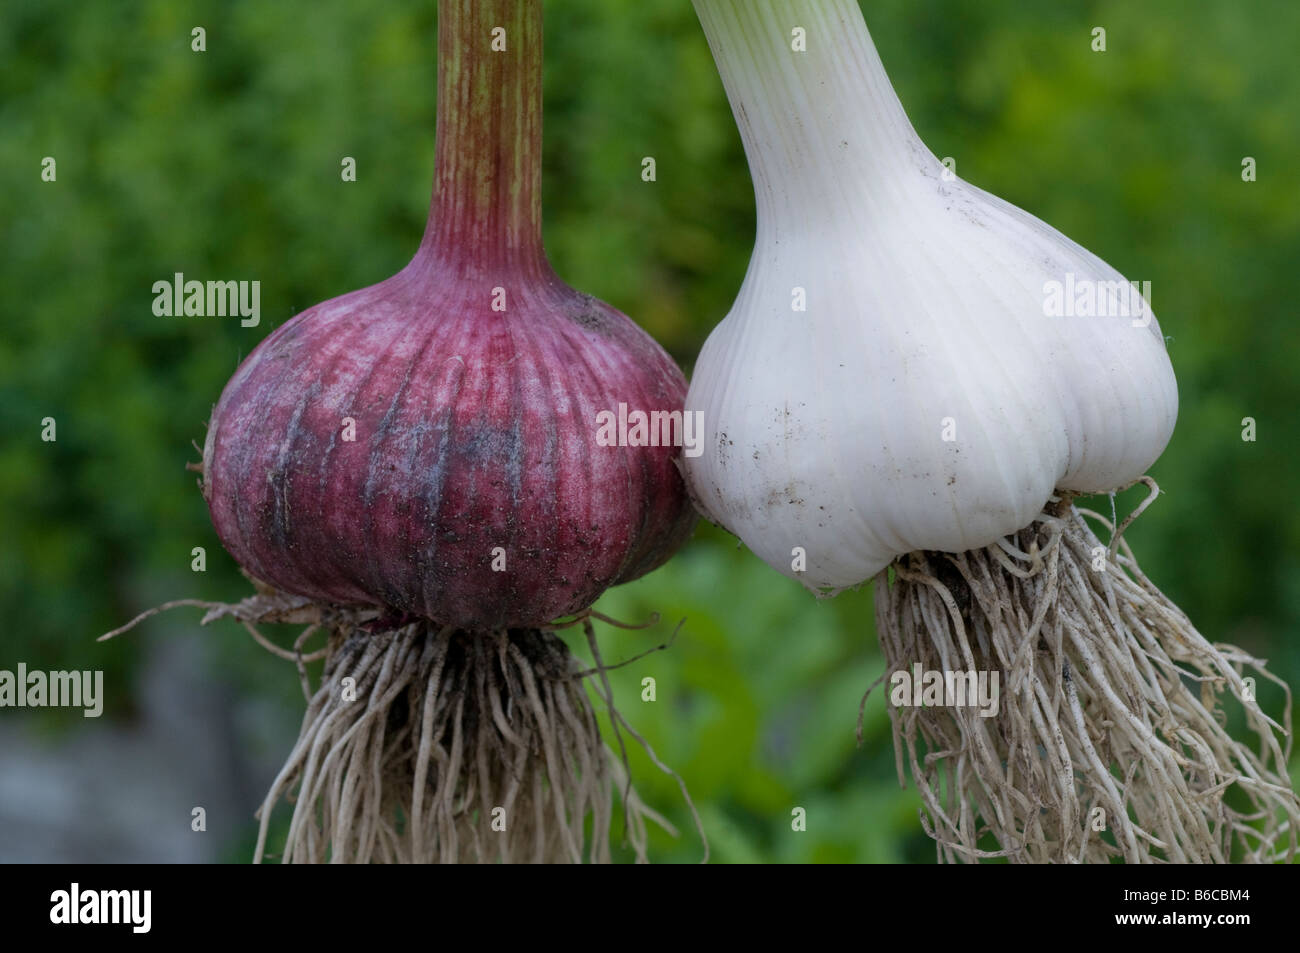 Two different varieties of freshly harvested garlic showing healthy root system Stock Photo